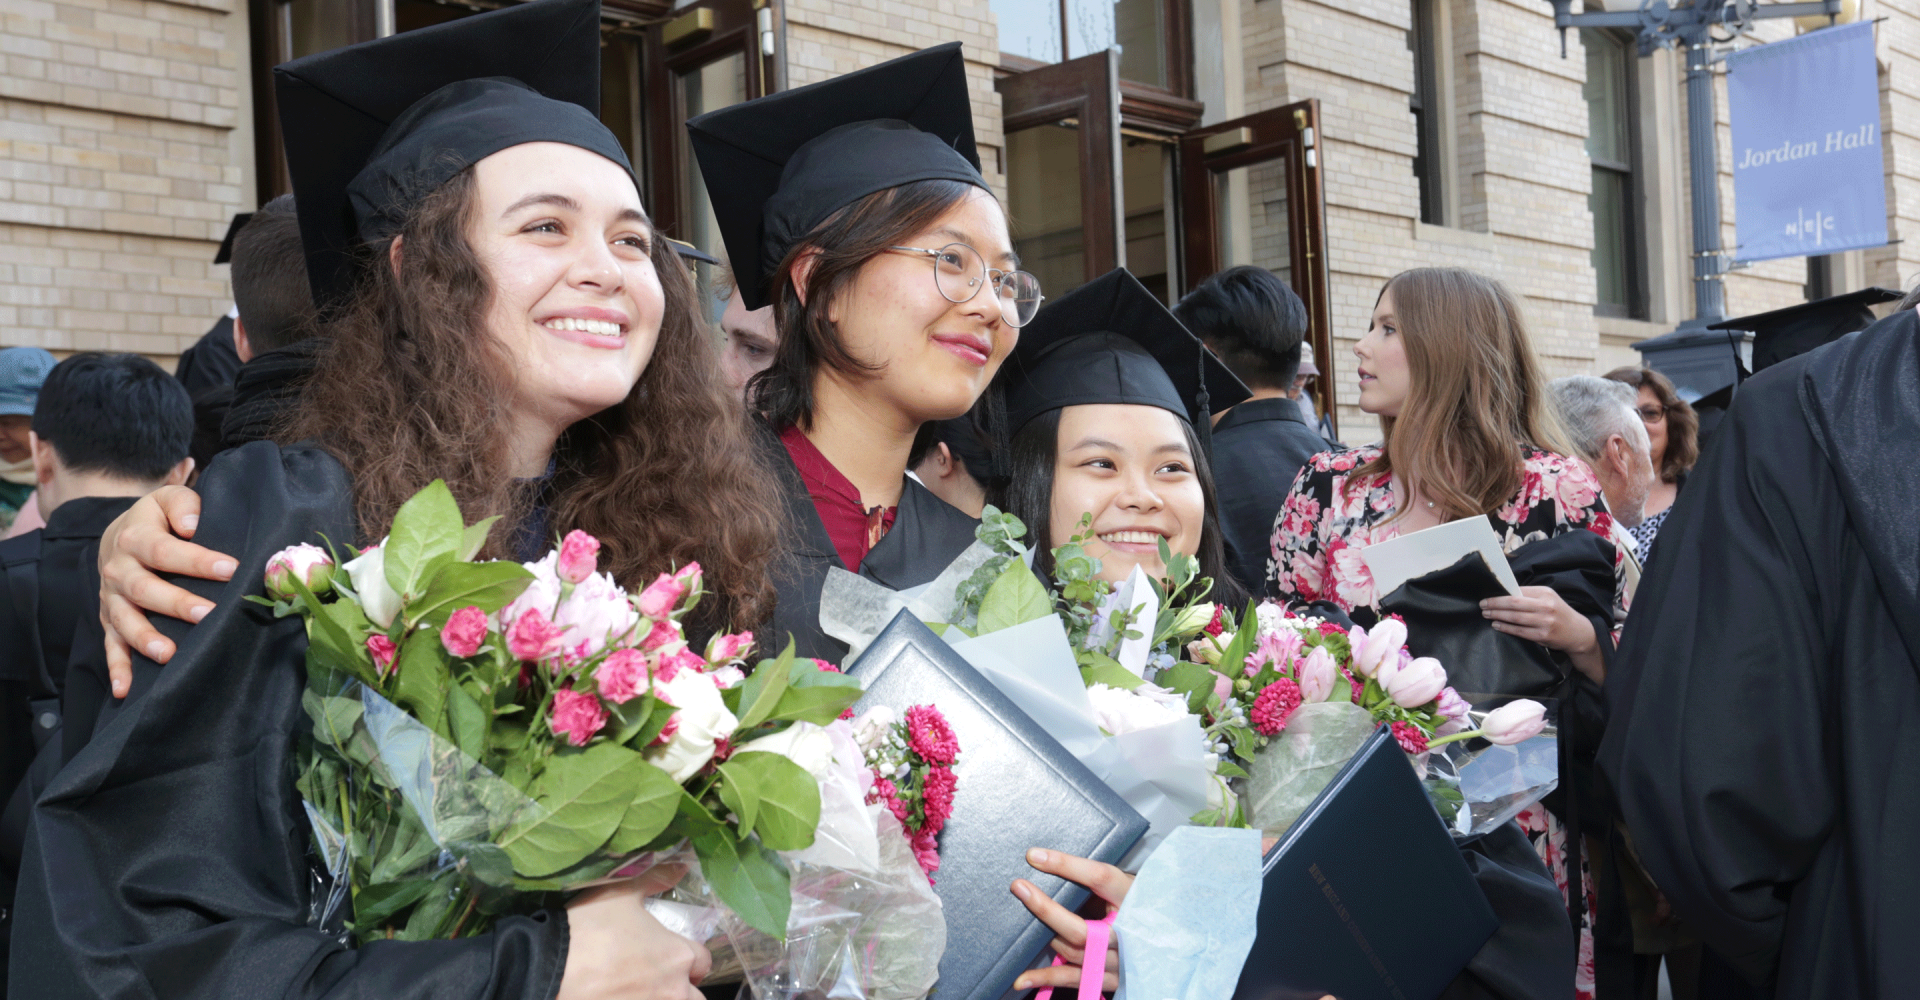 Students smile while wearing caps and gowns while holding bouquets in front of Jordan Hall